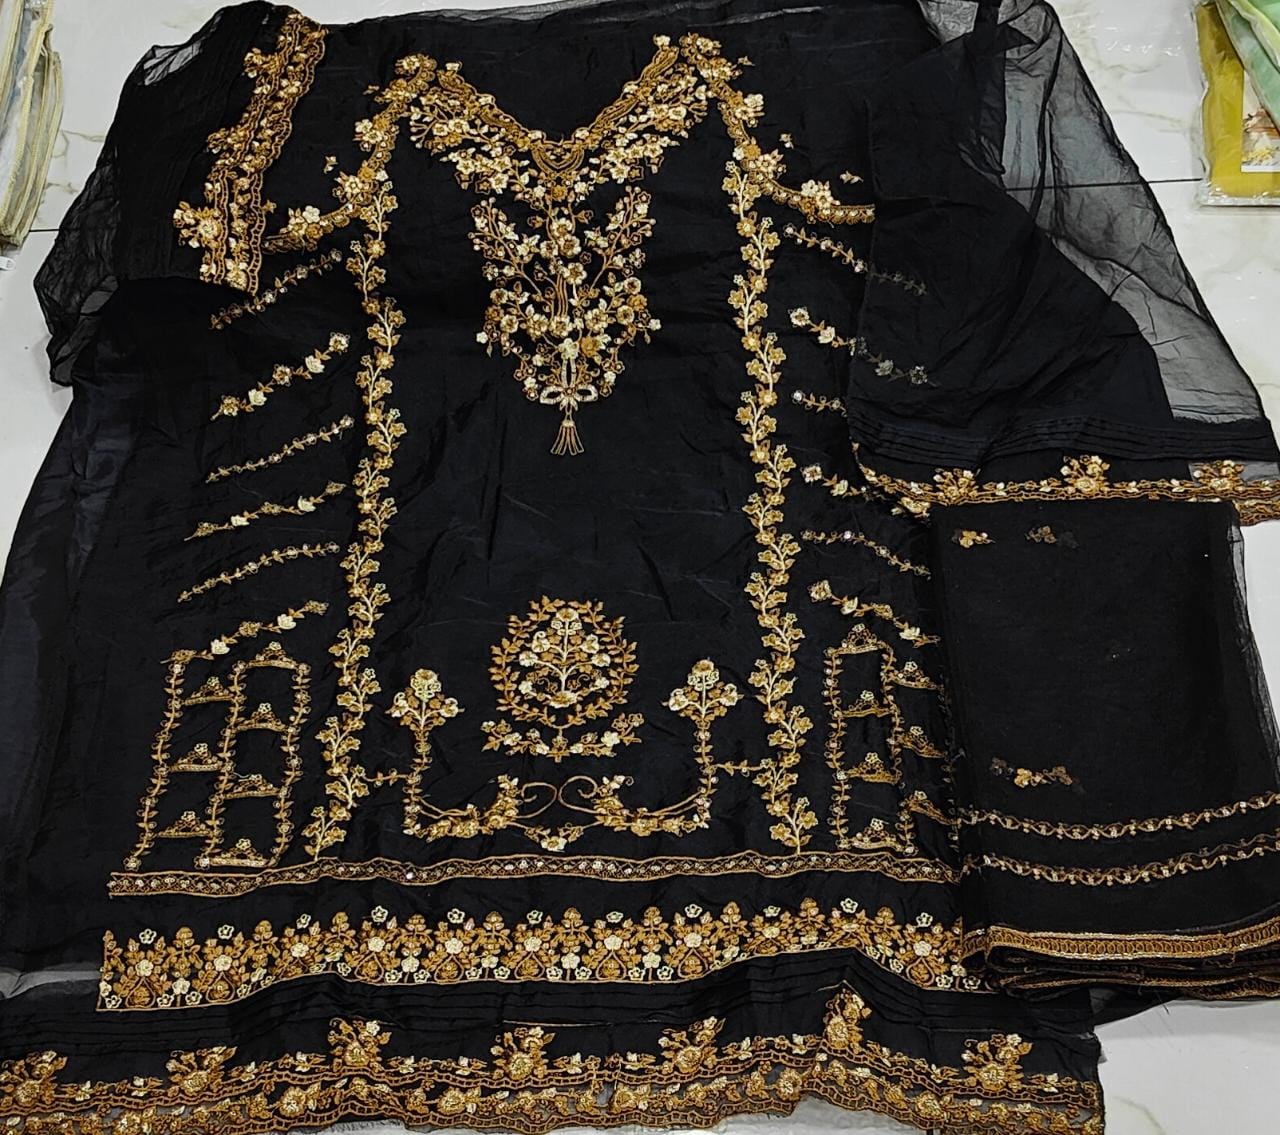 SHREE FABS S 763 PAKISTANI SUITS IN INDIA